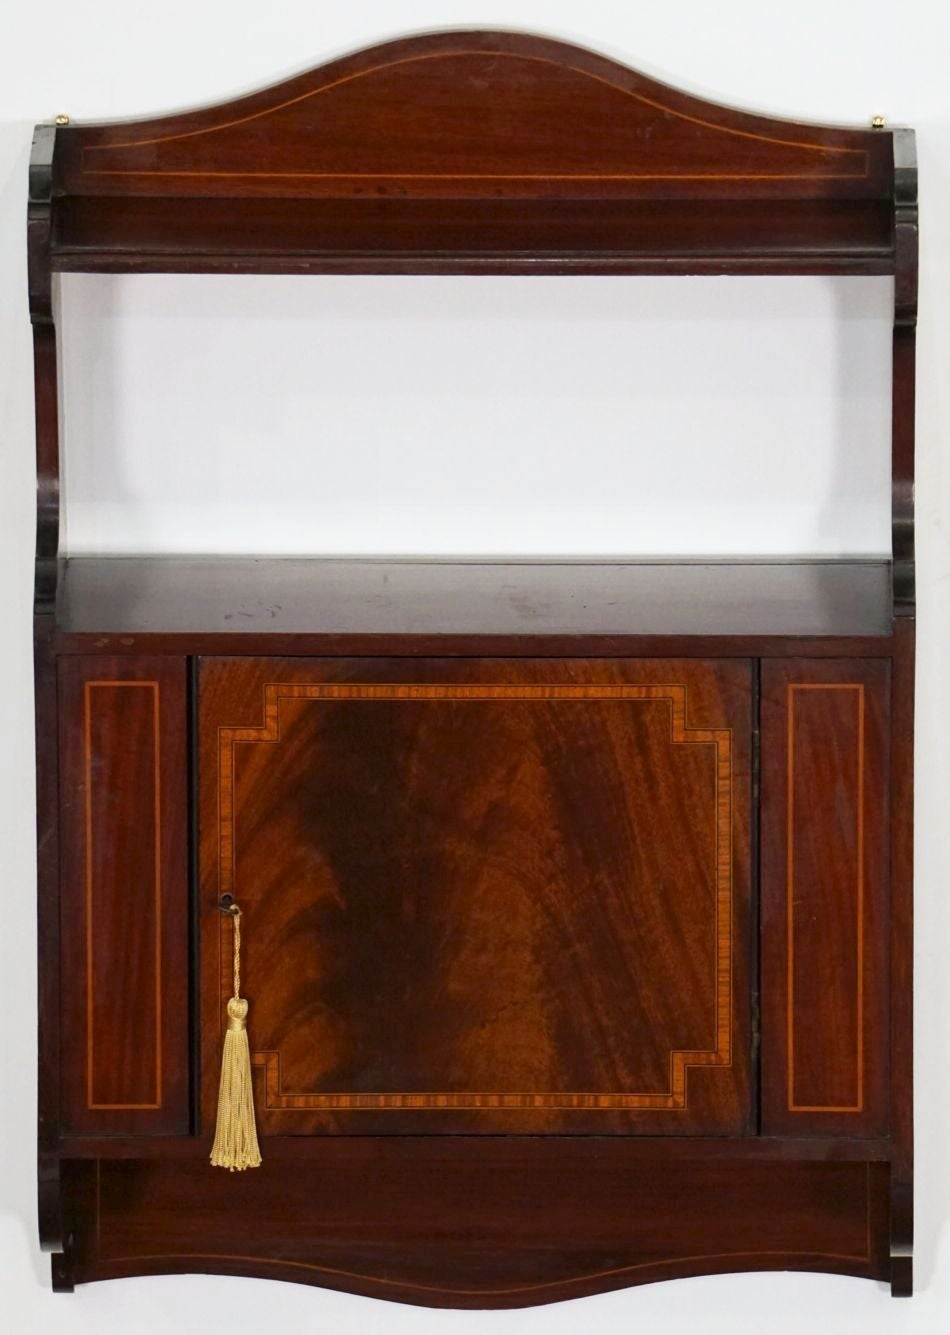 A fine English hanging shelf with or curio cabinet of inlaid mahogany, from the Edwardian period, featuring a decorative serpentine gallery backsplash with inlay above the top shelf, over an inlaid cabinet door that opens to a cupboard for storage,